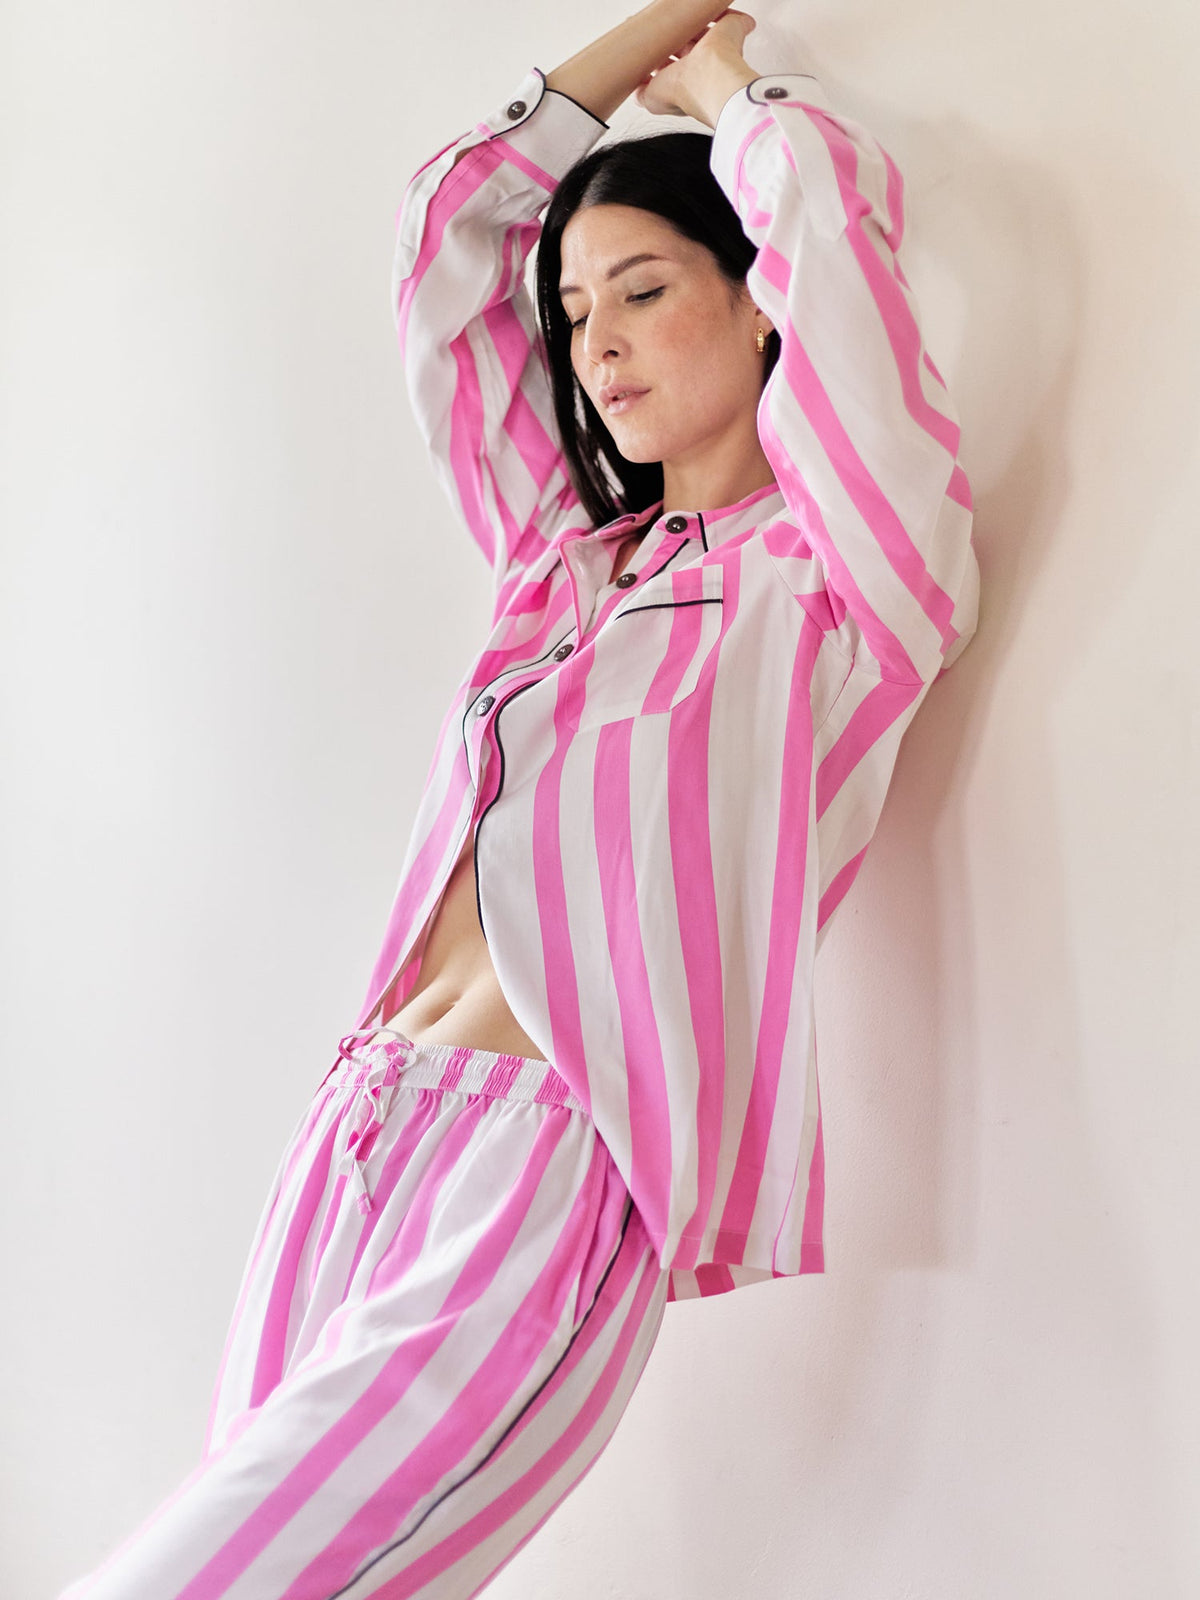 Woman wearing a pink and white striped loungewear set leans against a wall with her arms stretched.